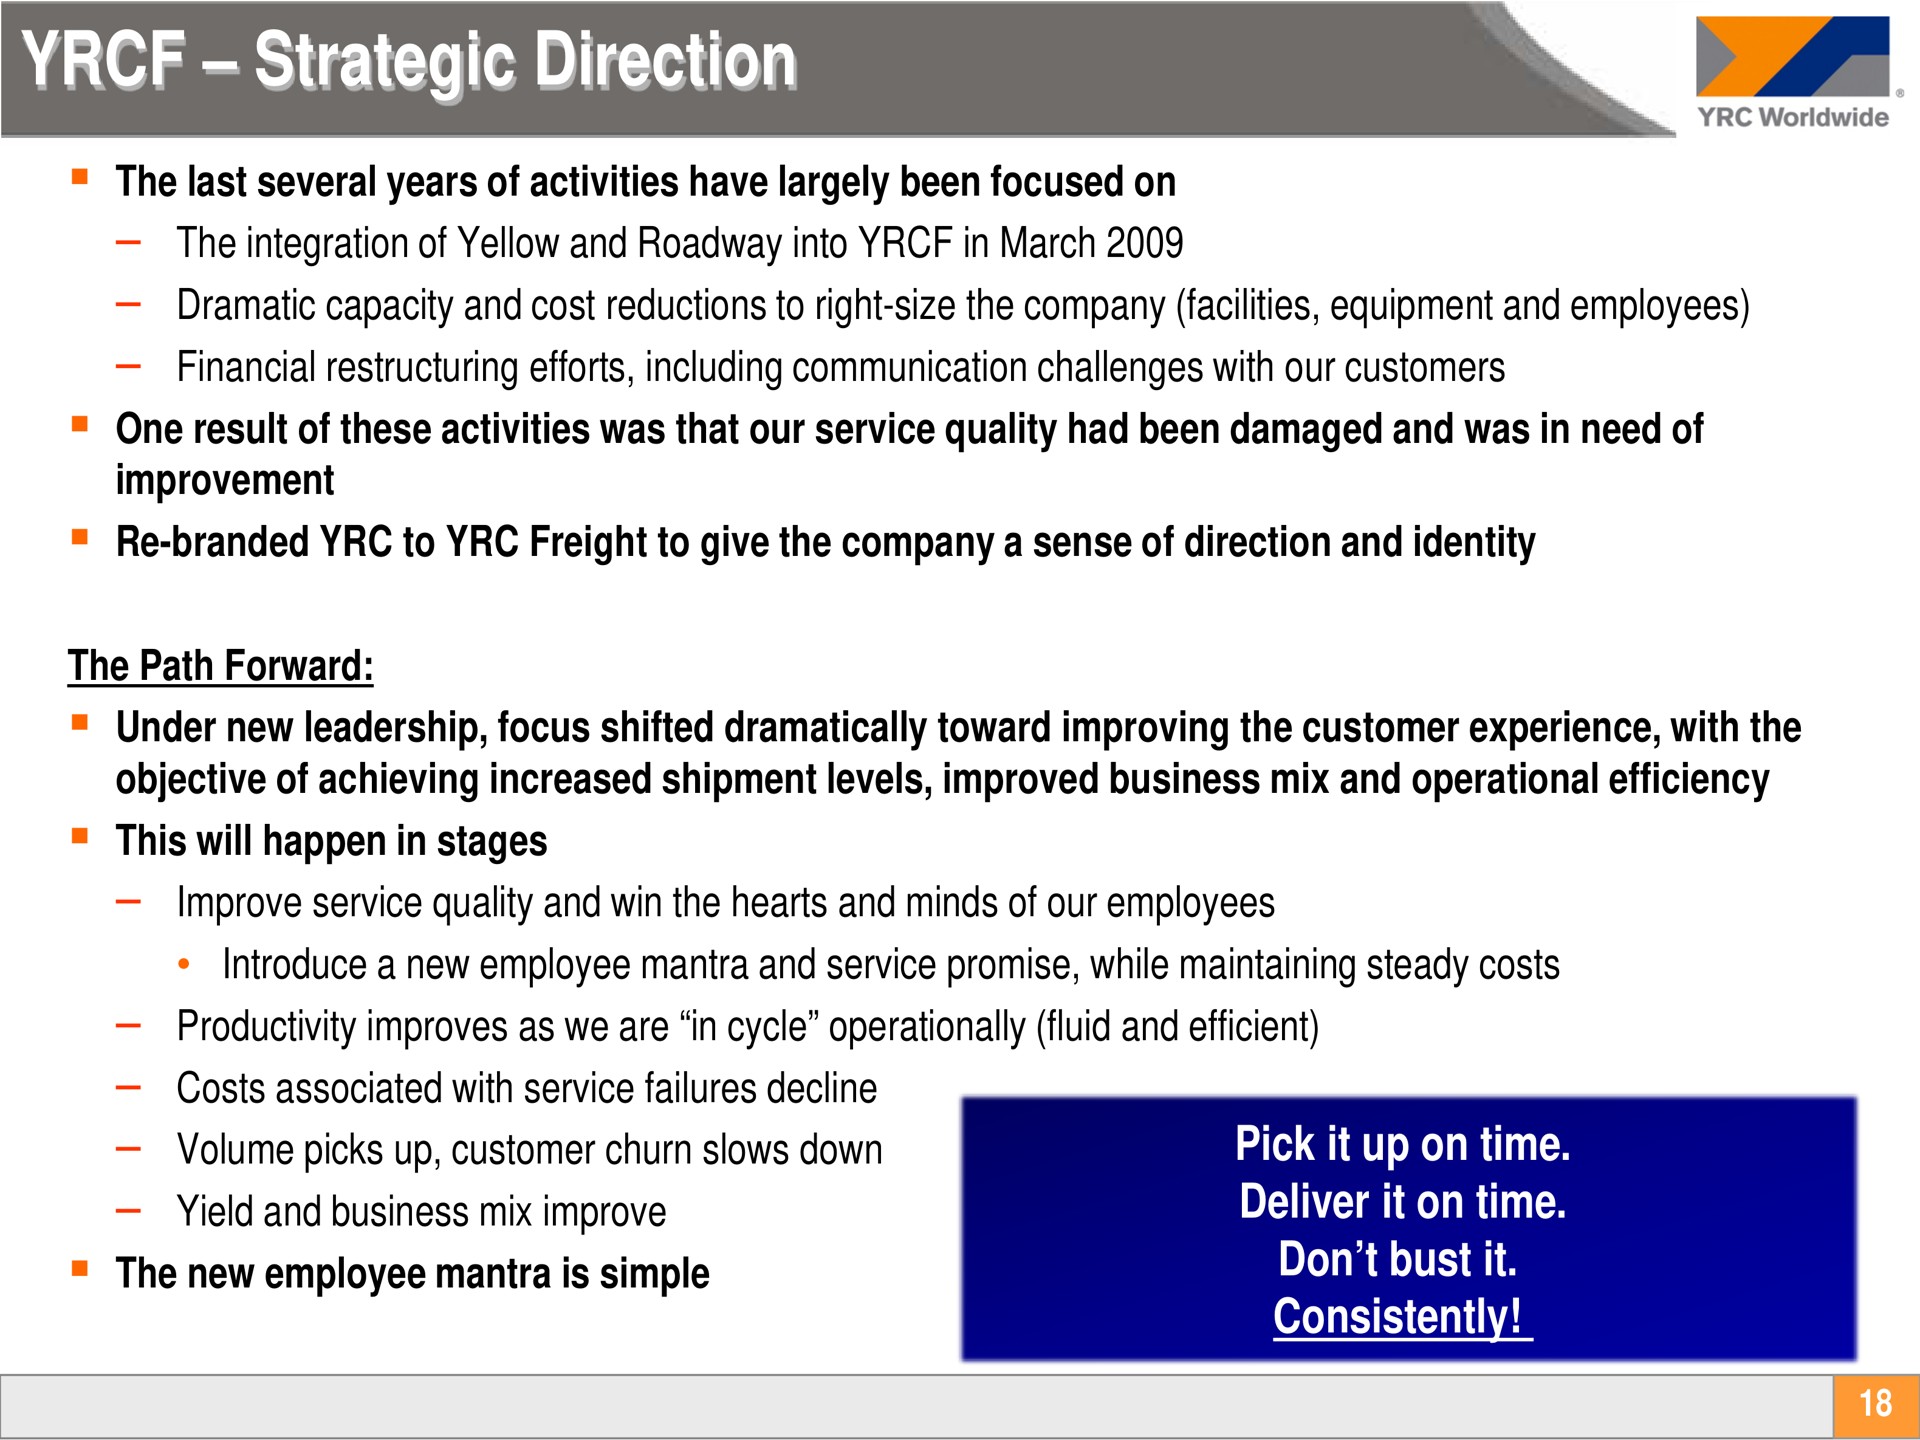 strategic direction yield and business mix improve the new employee mantra is simple | Yellow Corporation